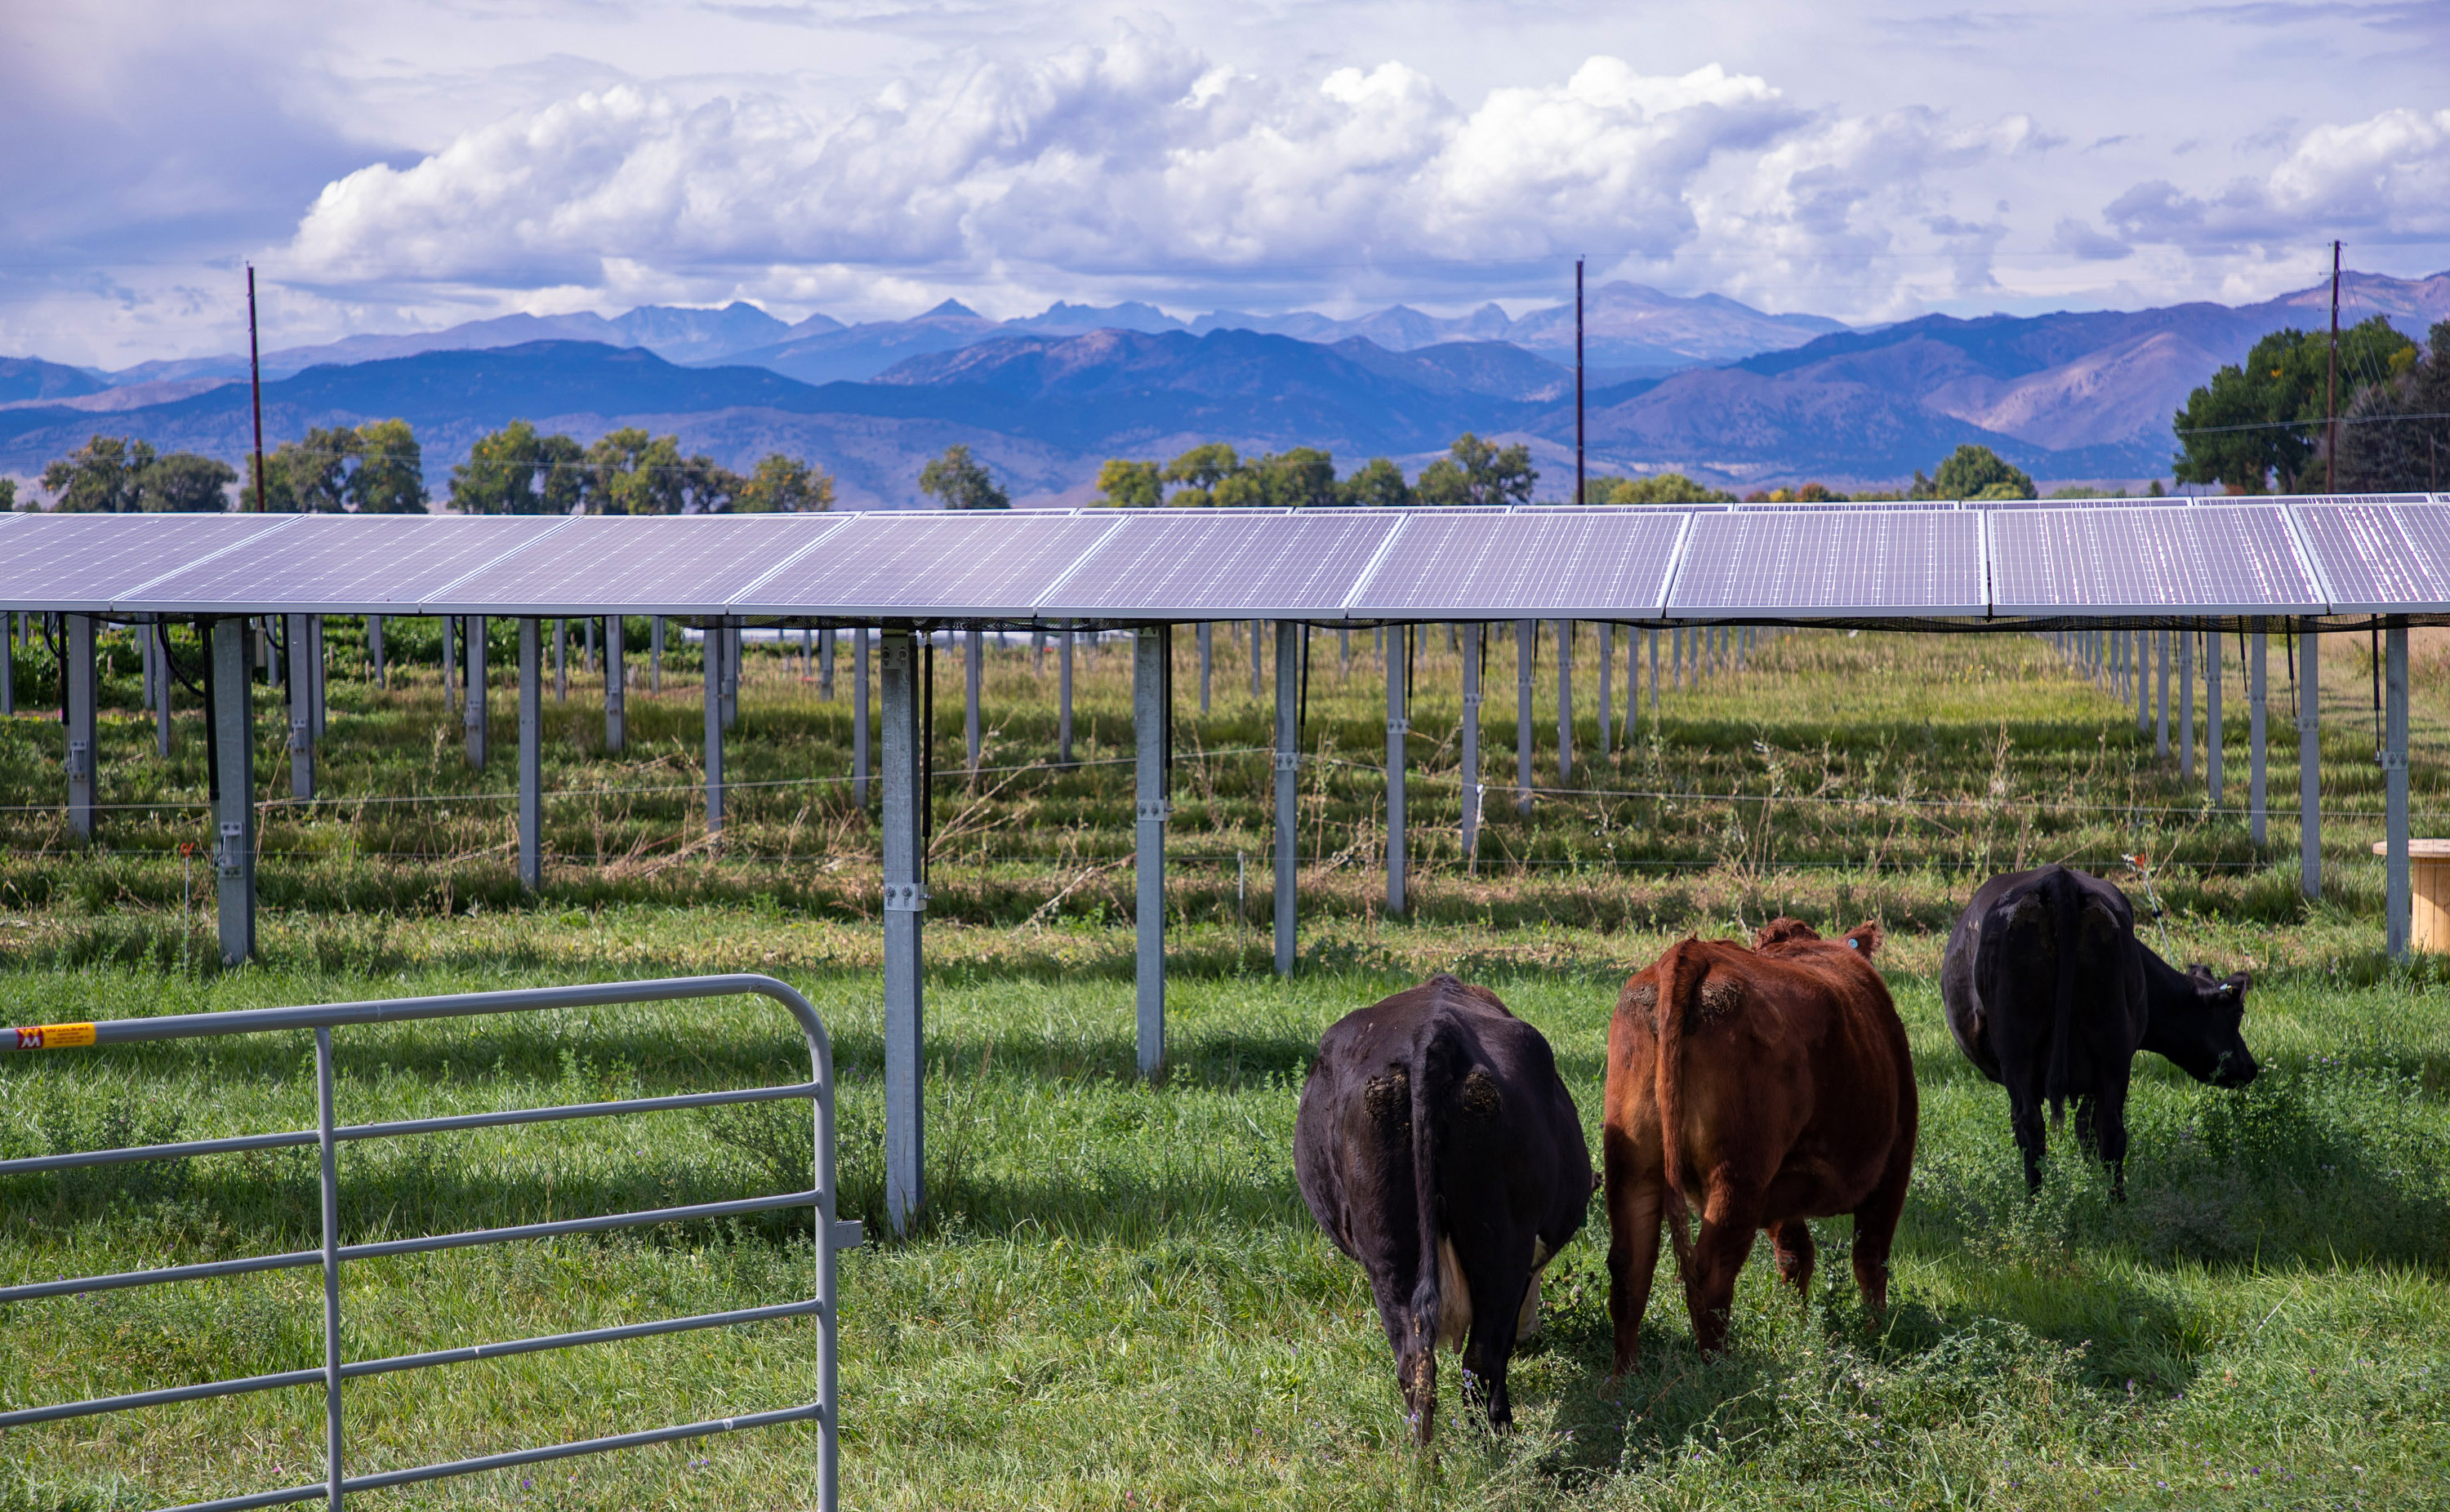 three cows standing next to an array of solar panels